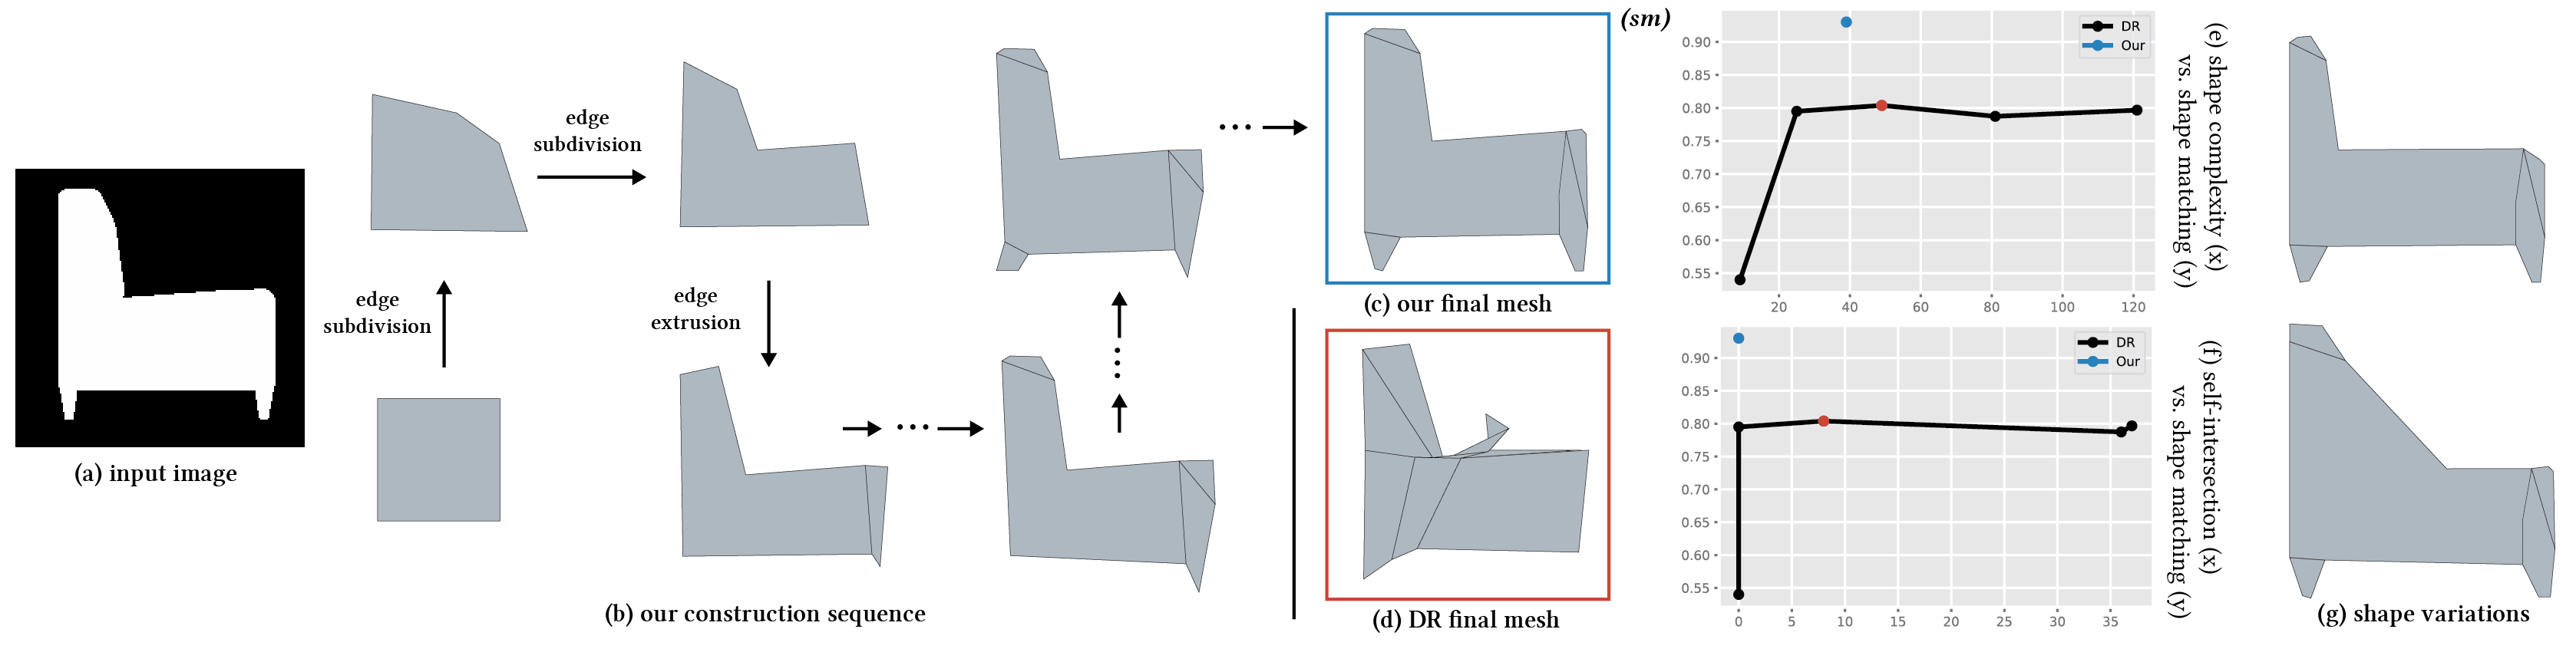 AutoPoly: Predicting a Polygonal Mesh Construction Sequence from a